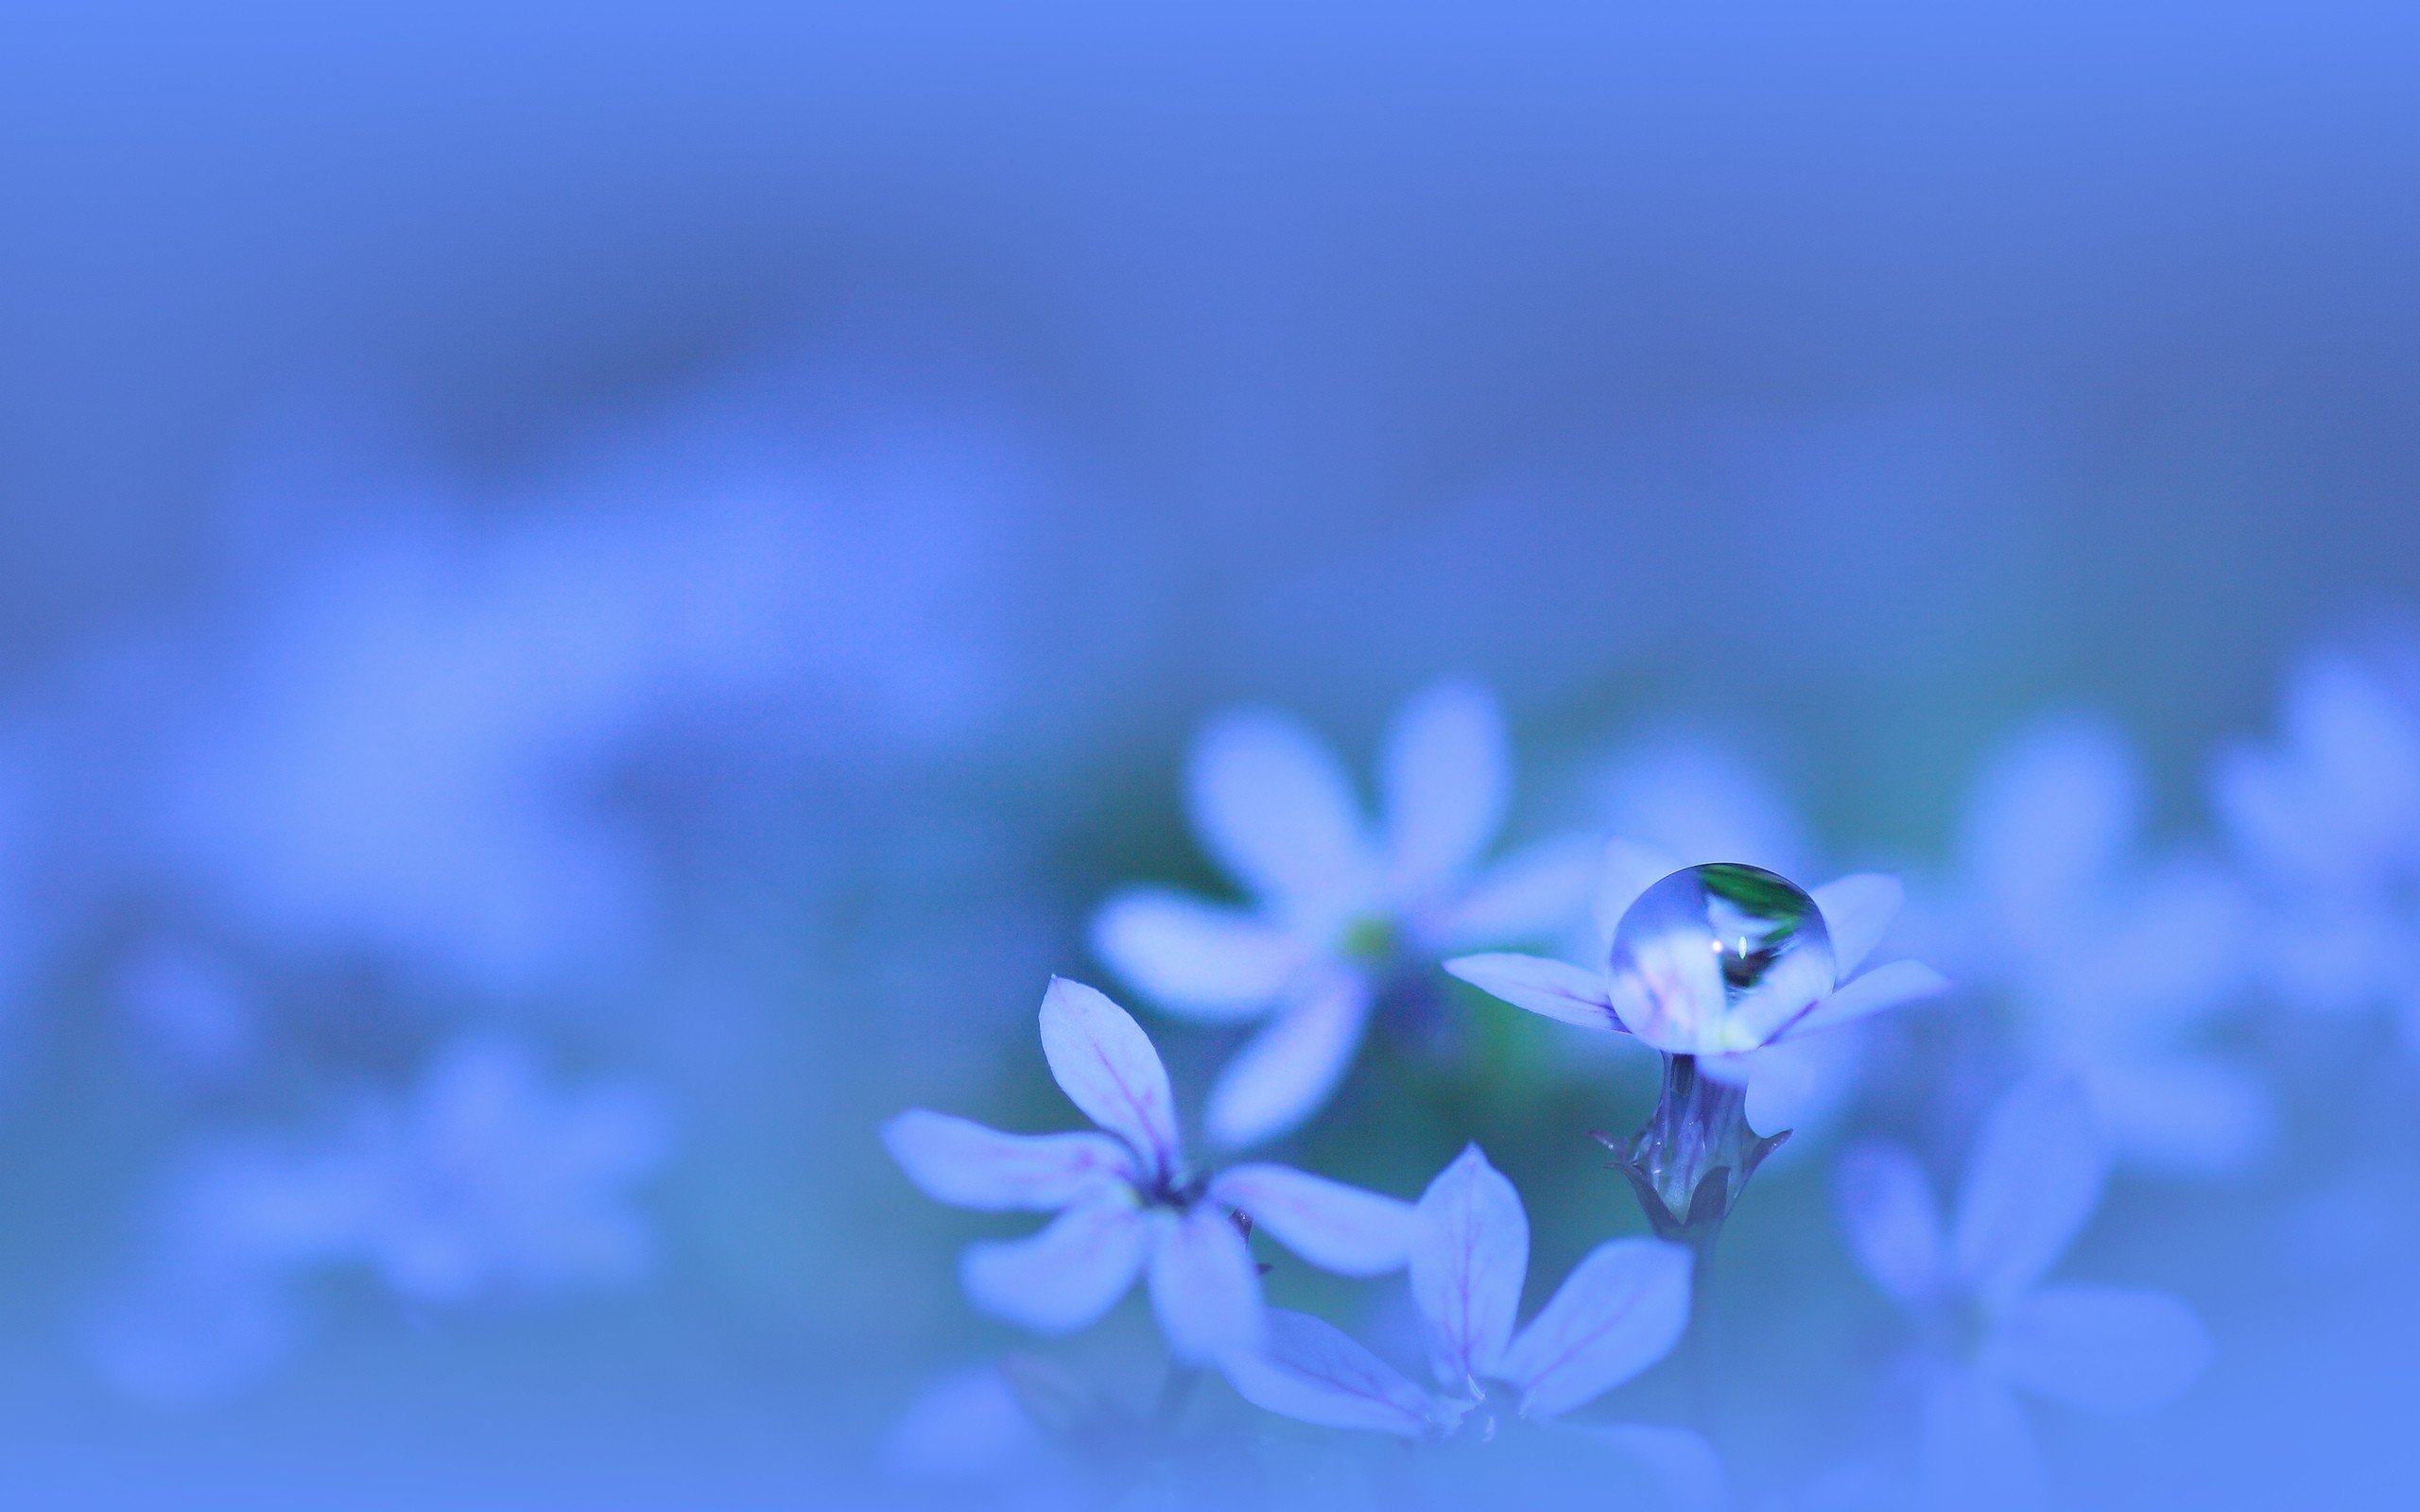 Flower With Water Drops Wallpaper Blue Water Drops on Flowers 2560x1600